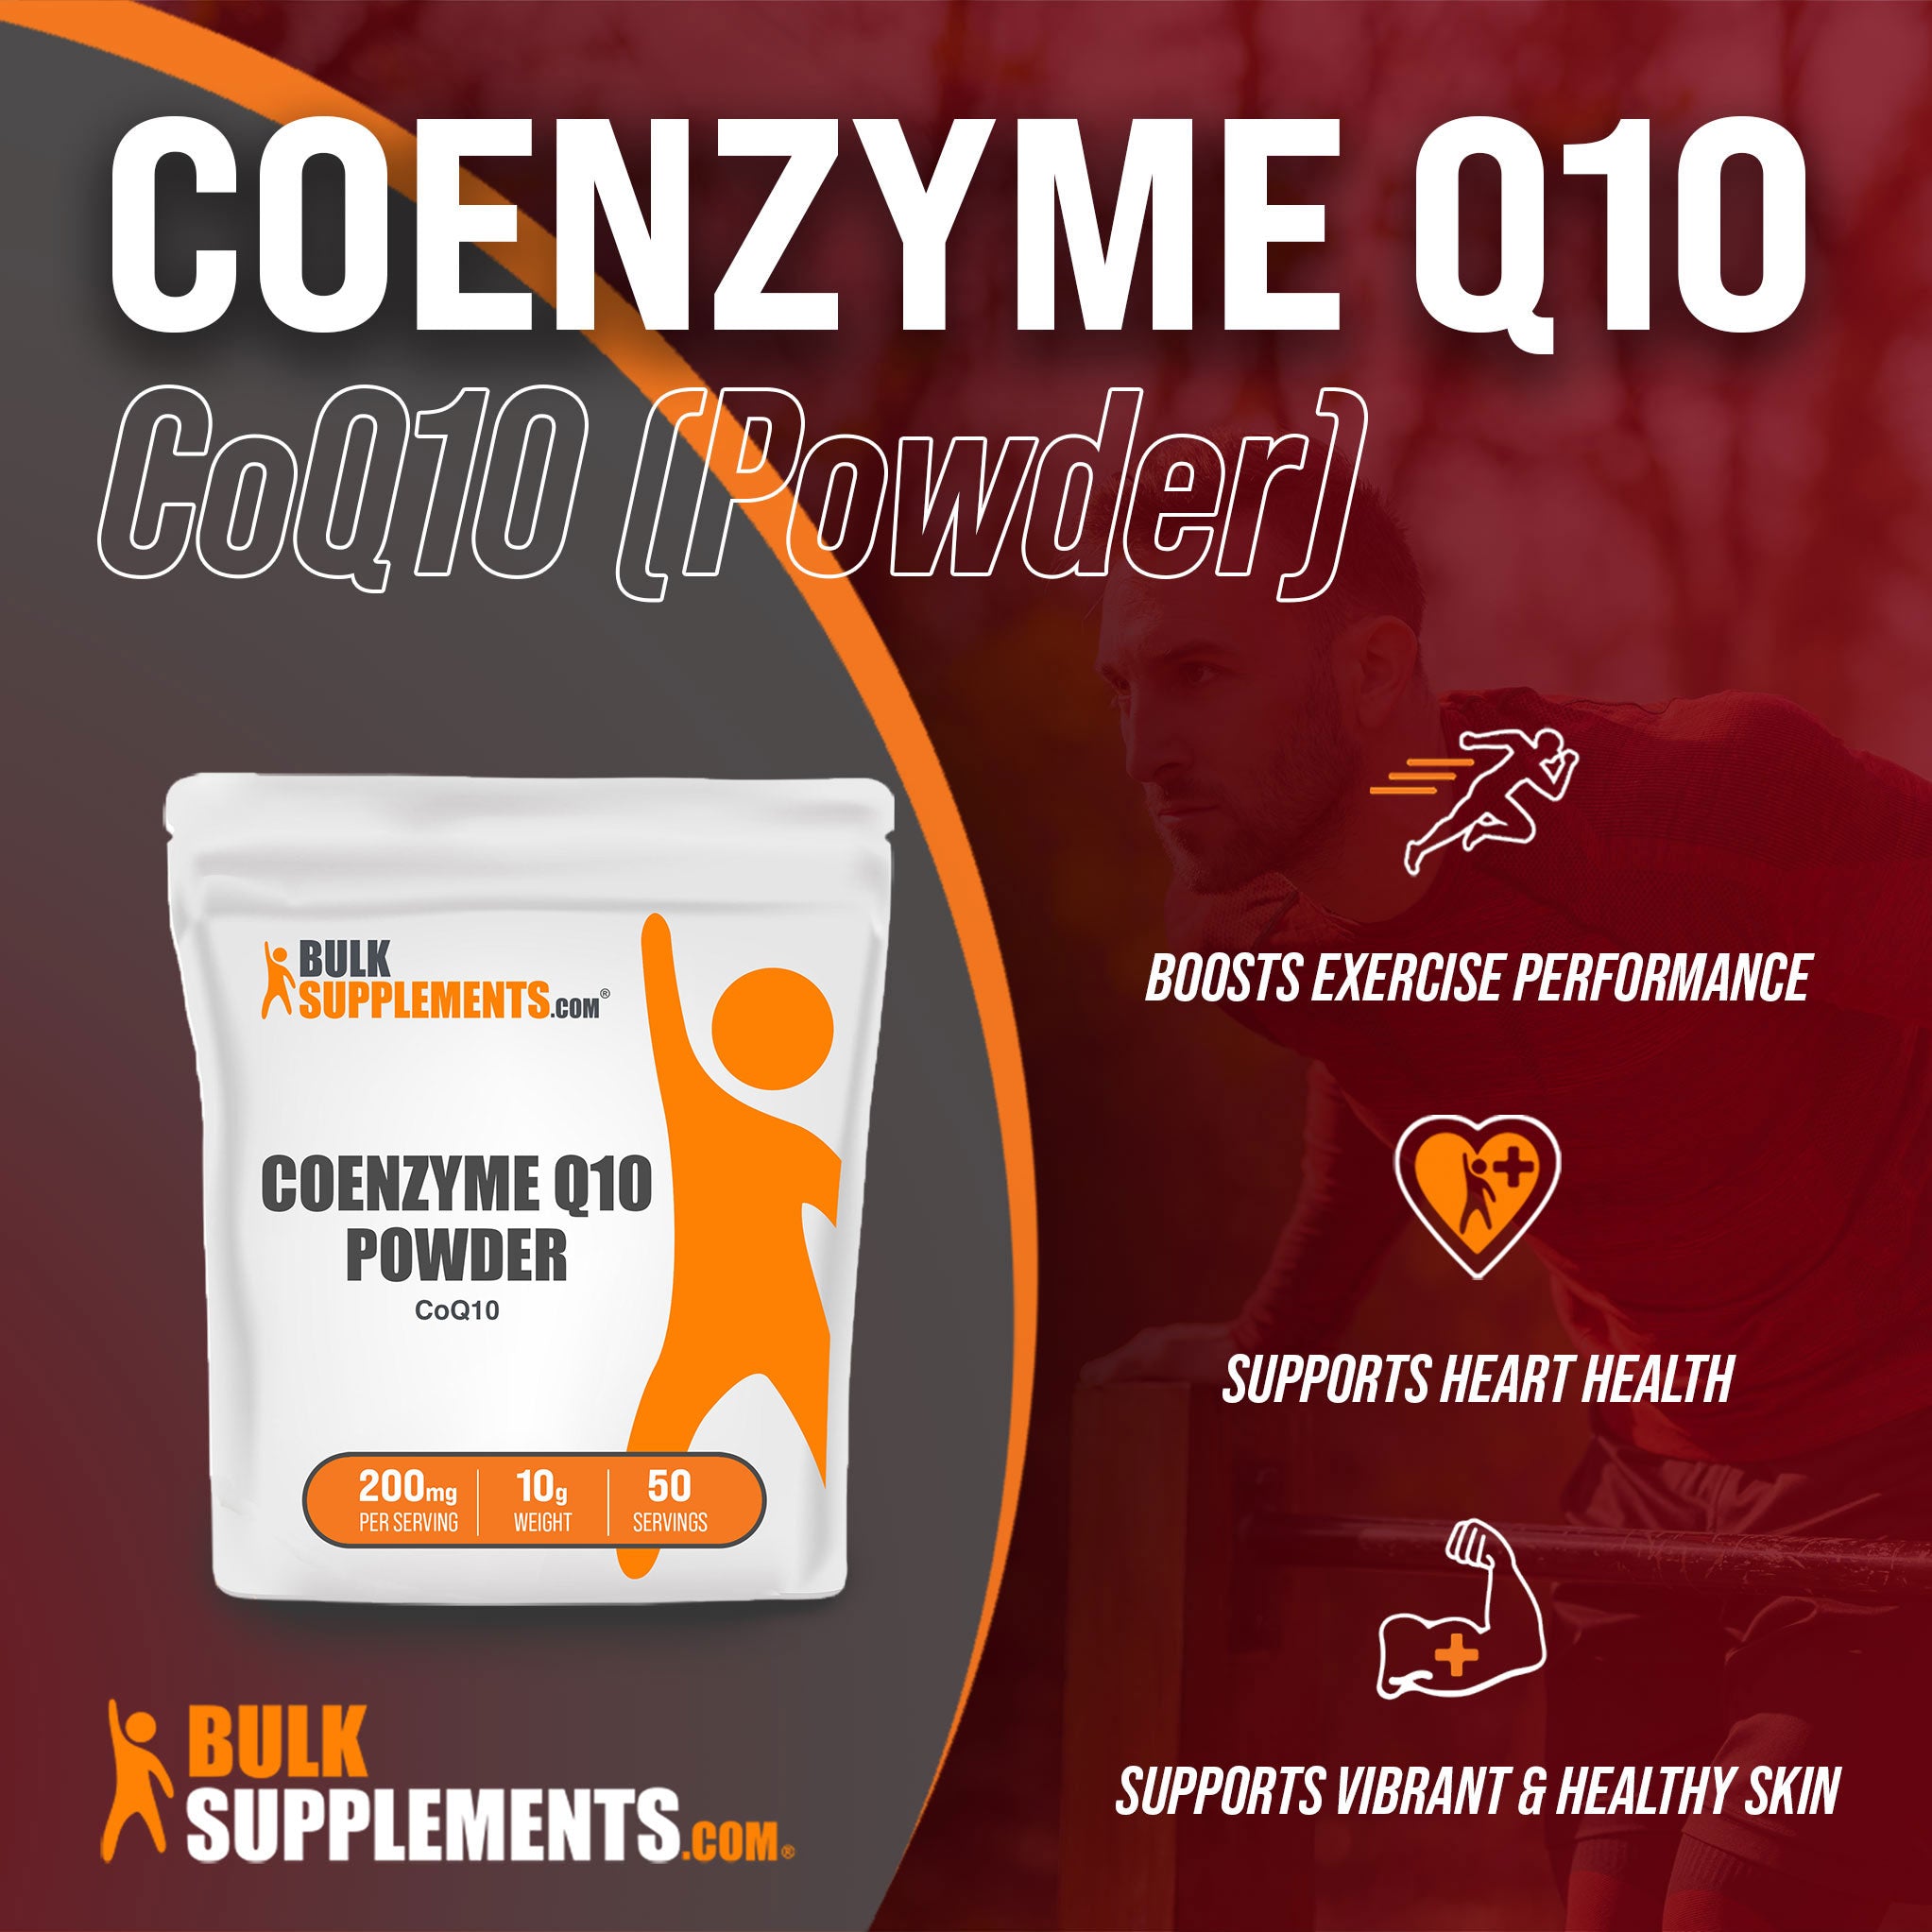 Benefits of Coenzyme Q10 CoQ10; boosts exercise performance, supports heart health, supports vibrant & healthy skin